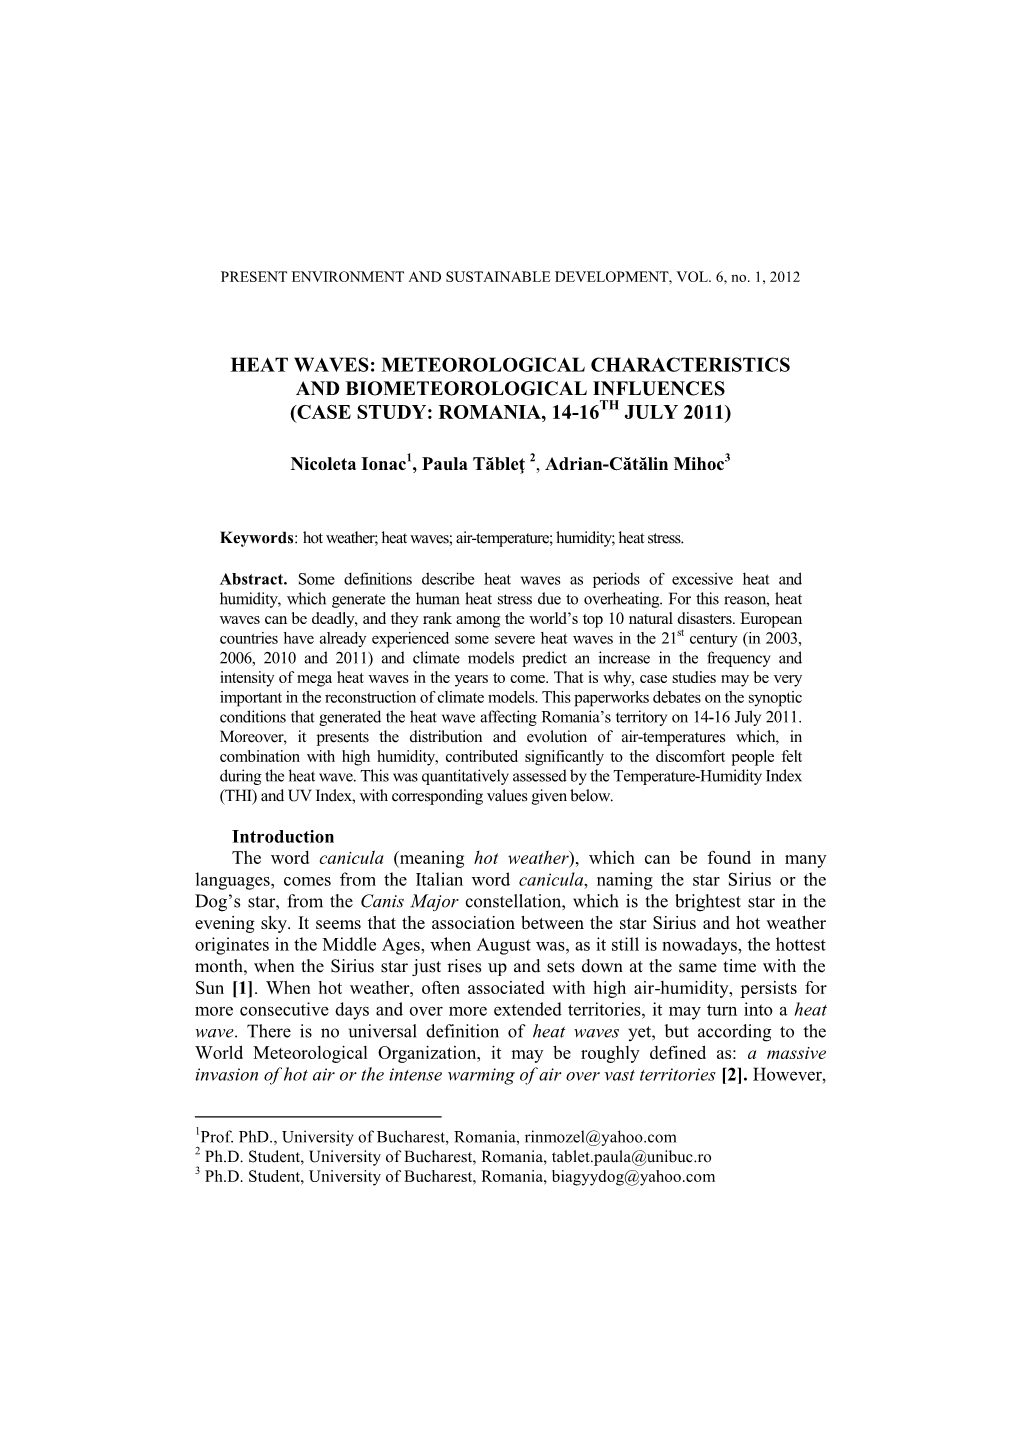 Heat Waves: Meteorological Characteristics and Biometeorological Influences (Case Study: Romania, 14-16Th July 2011)